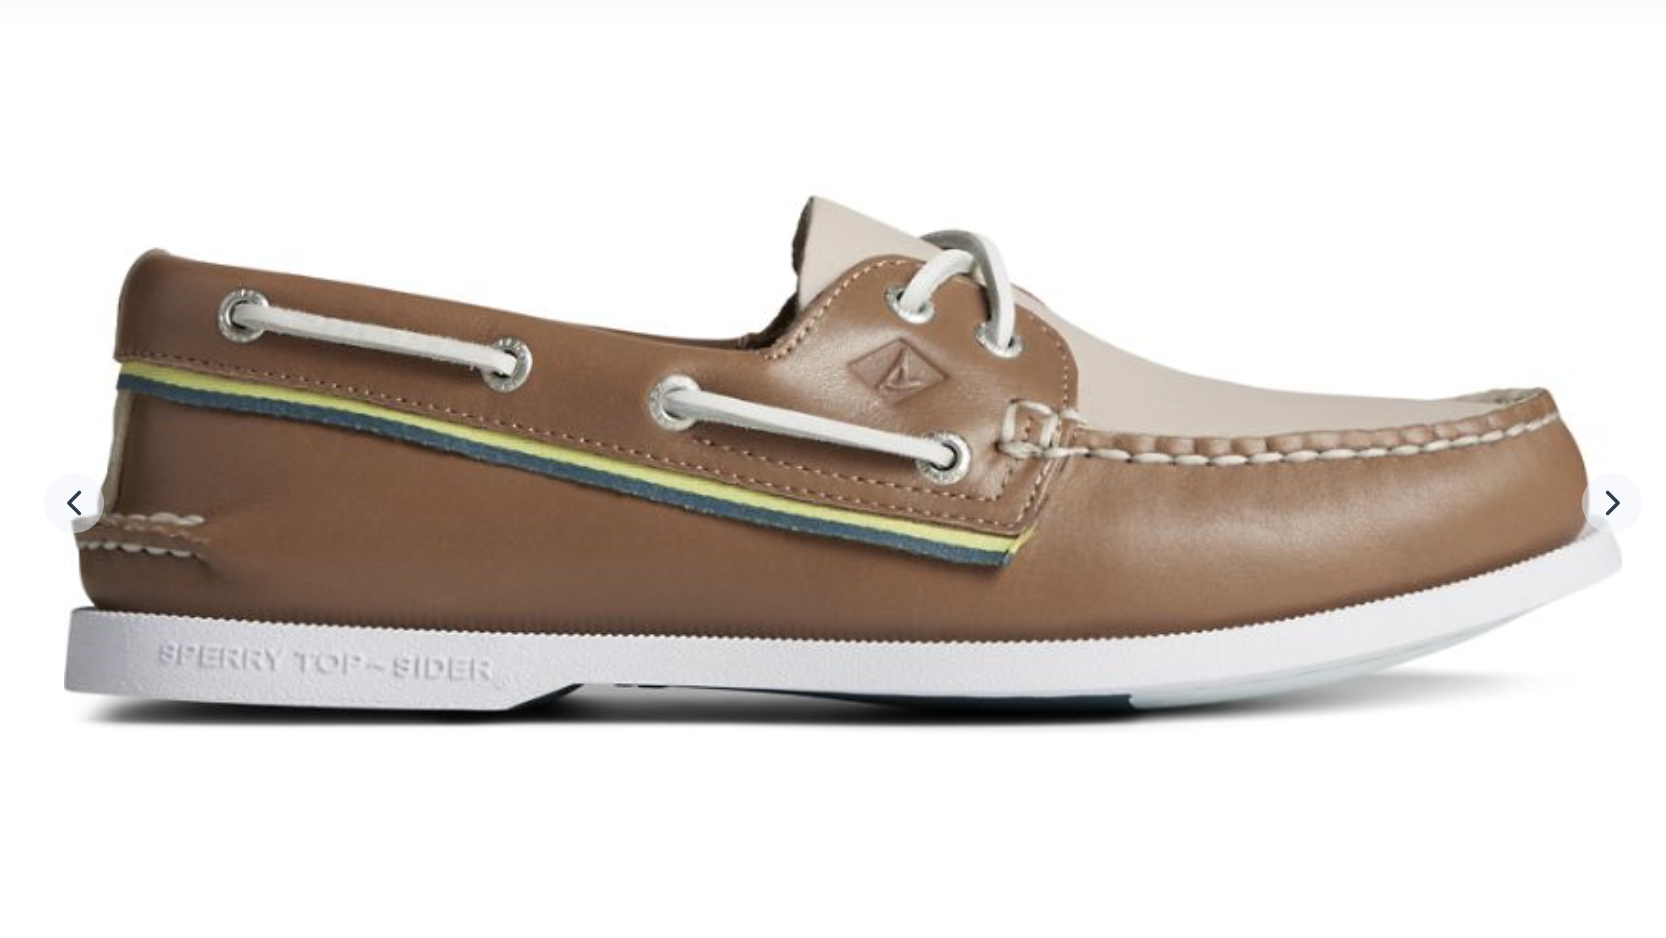 A brown and tan single Sperry boat shoe